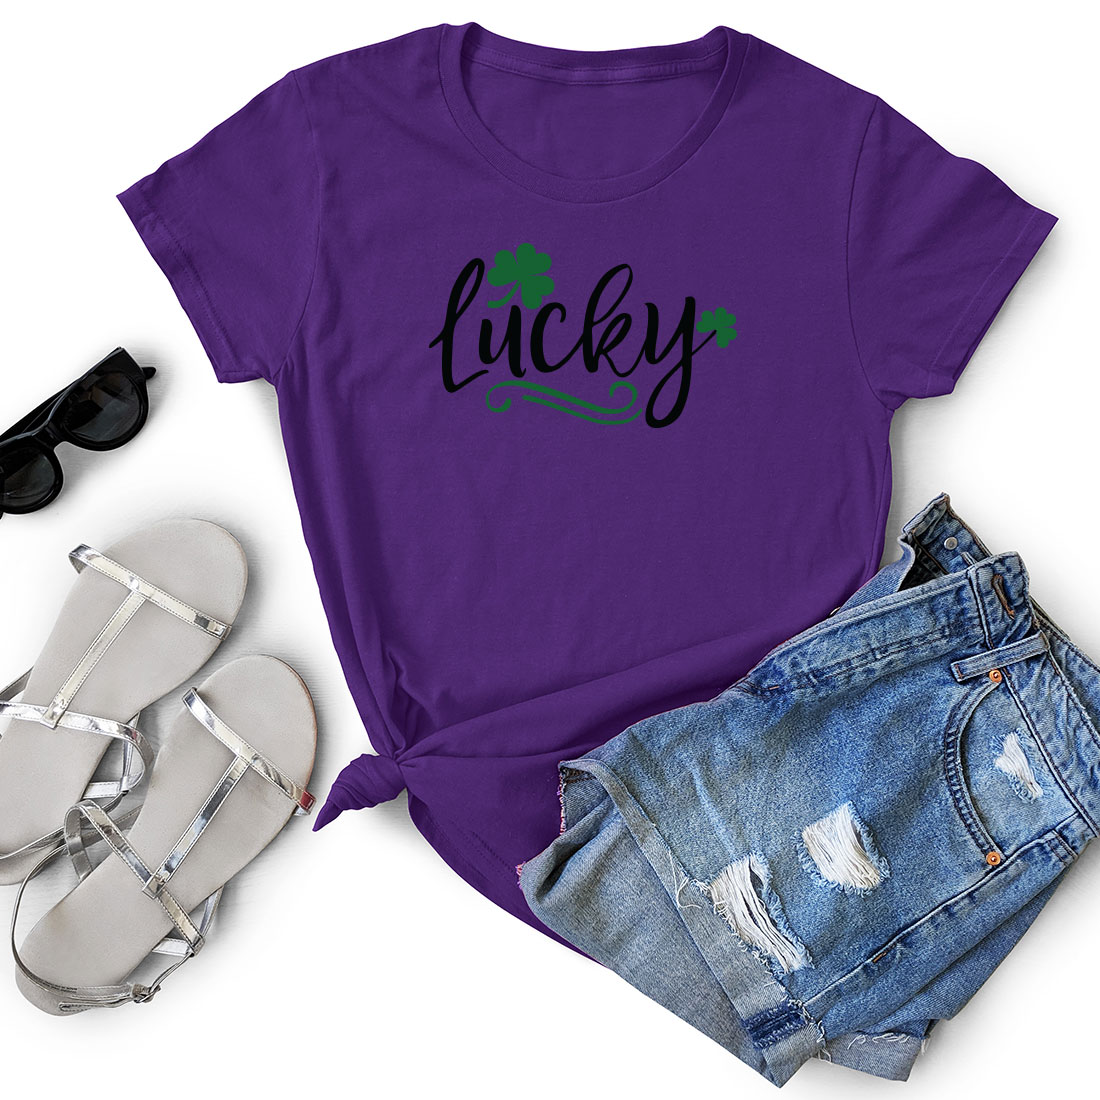 T - shirt that says lucky next to a pair of shorts.